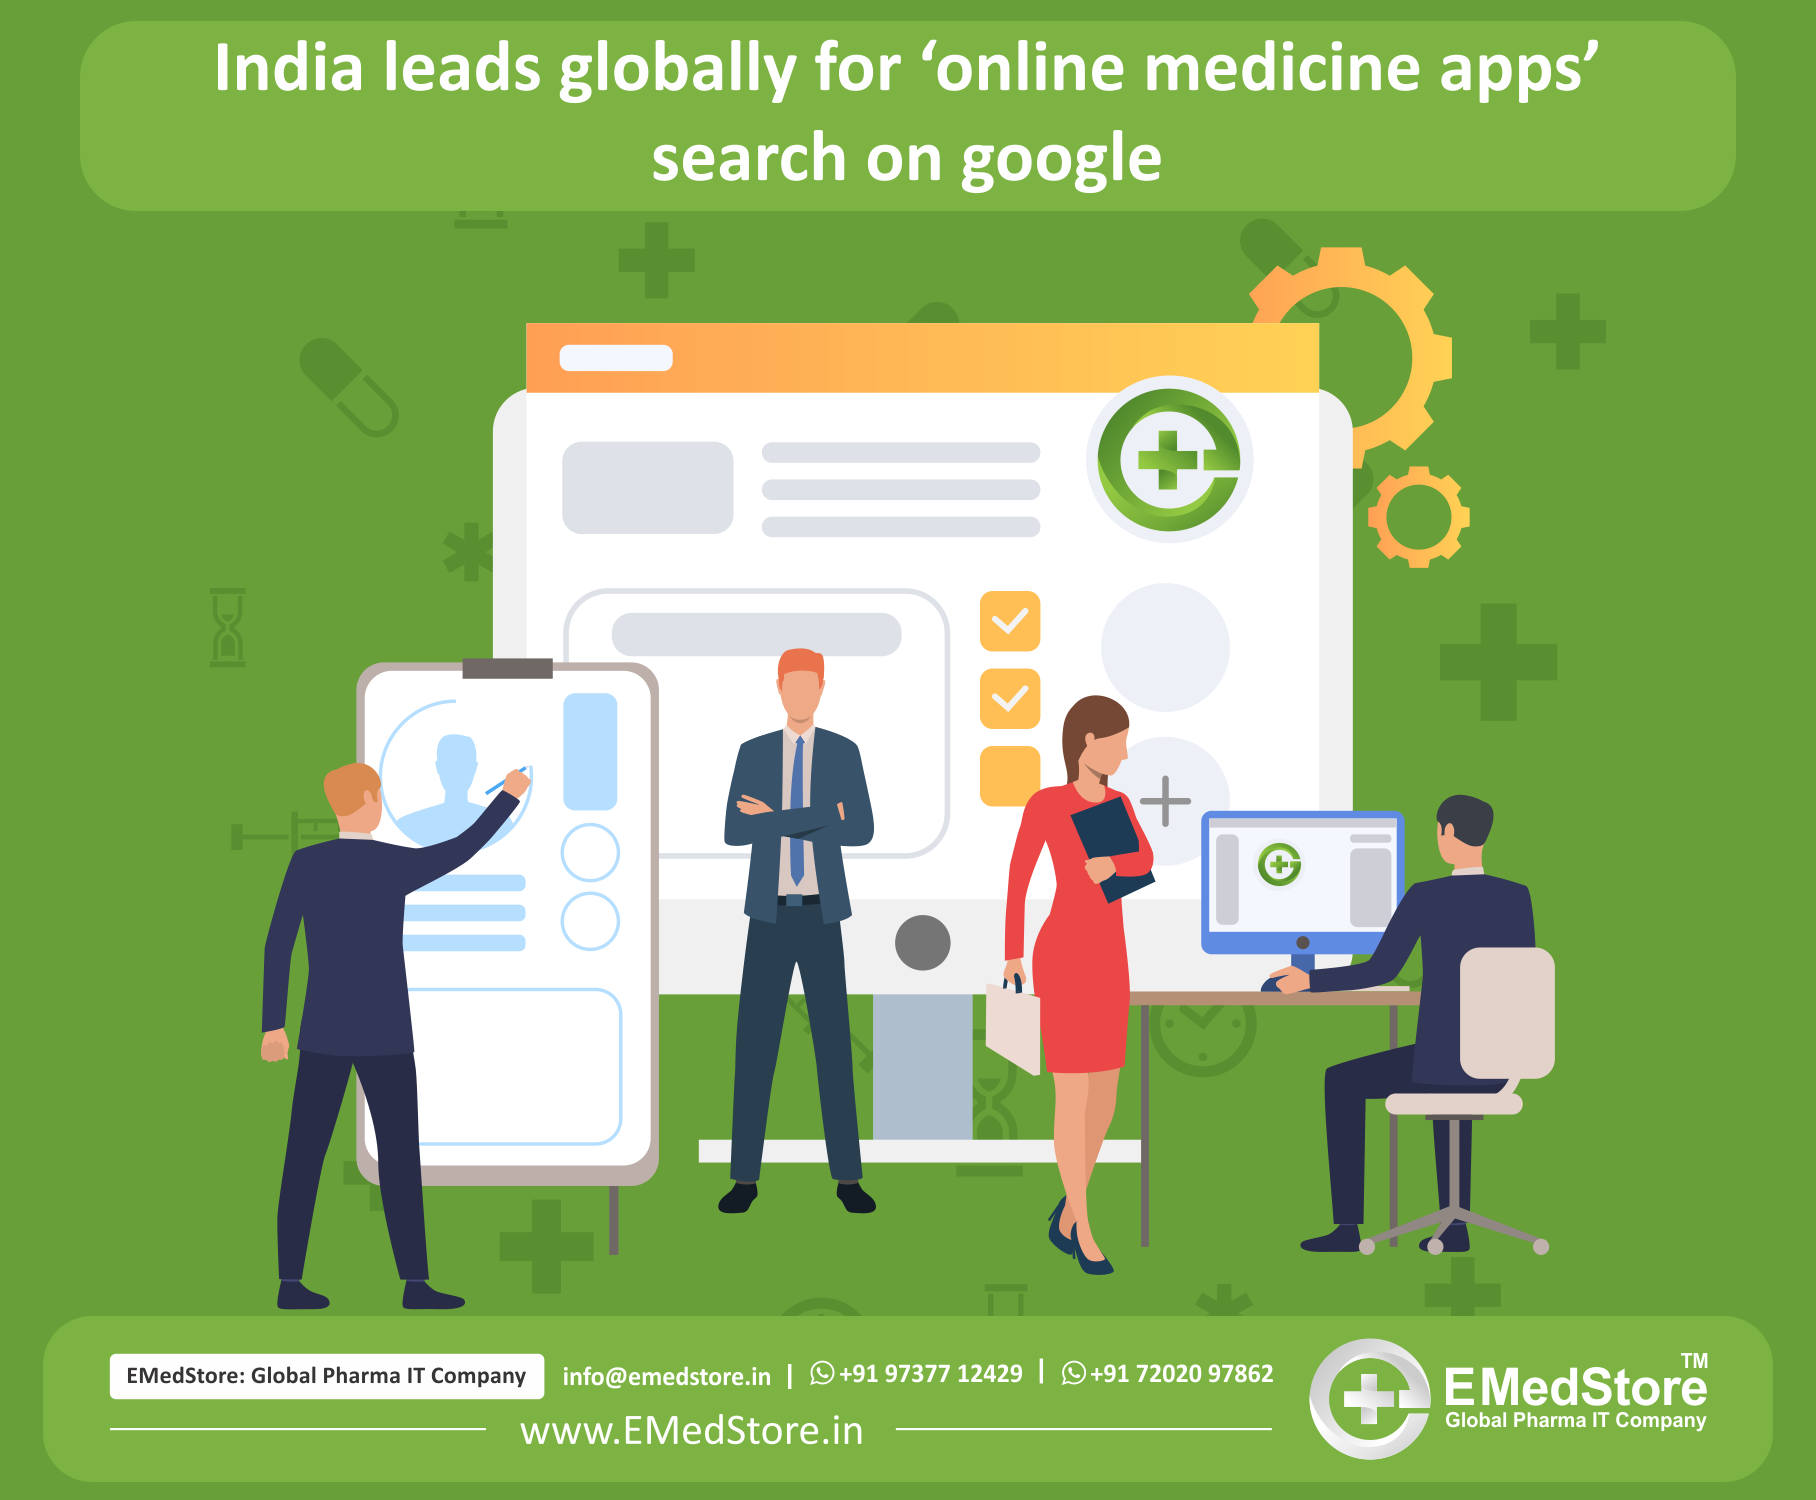 India leads globally for ‘online medicine apps’ search on google